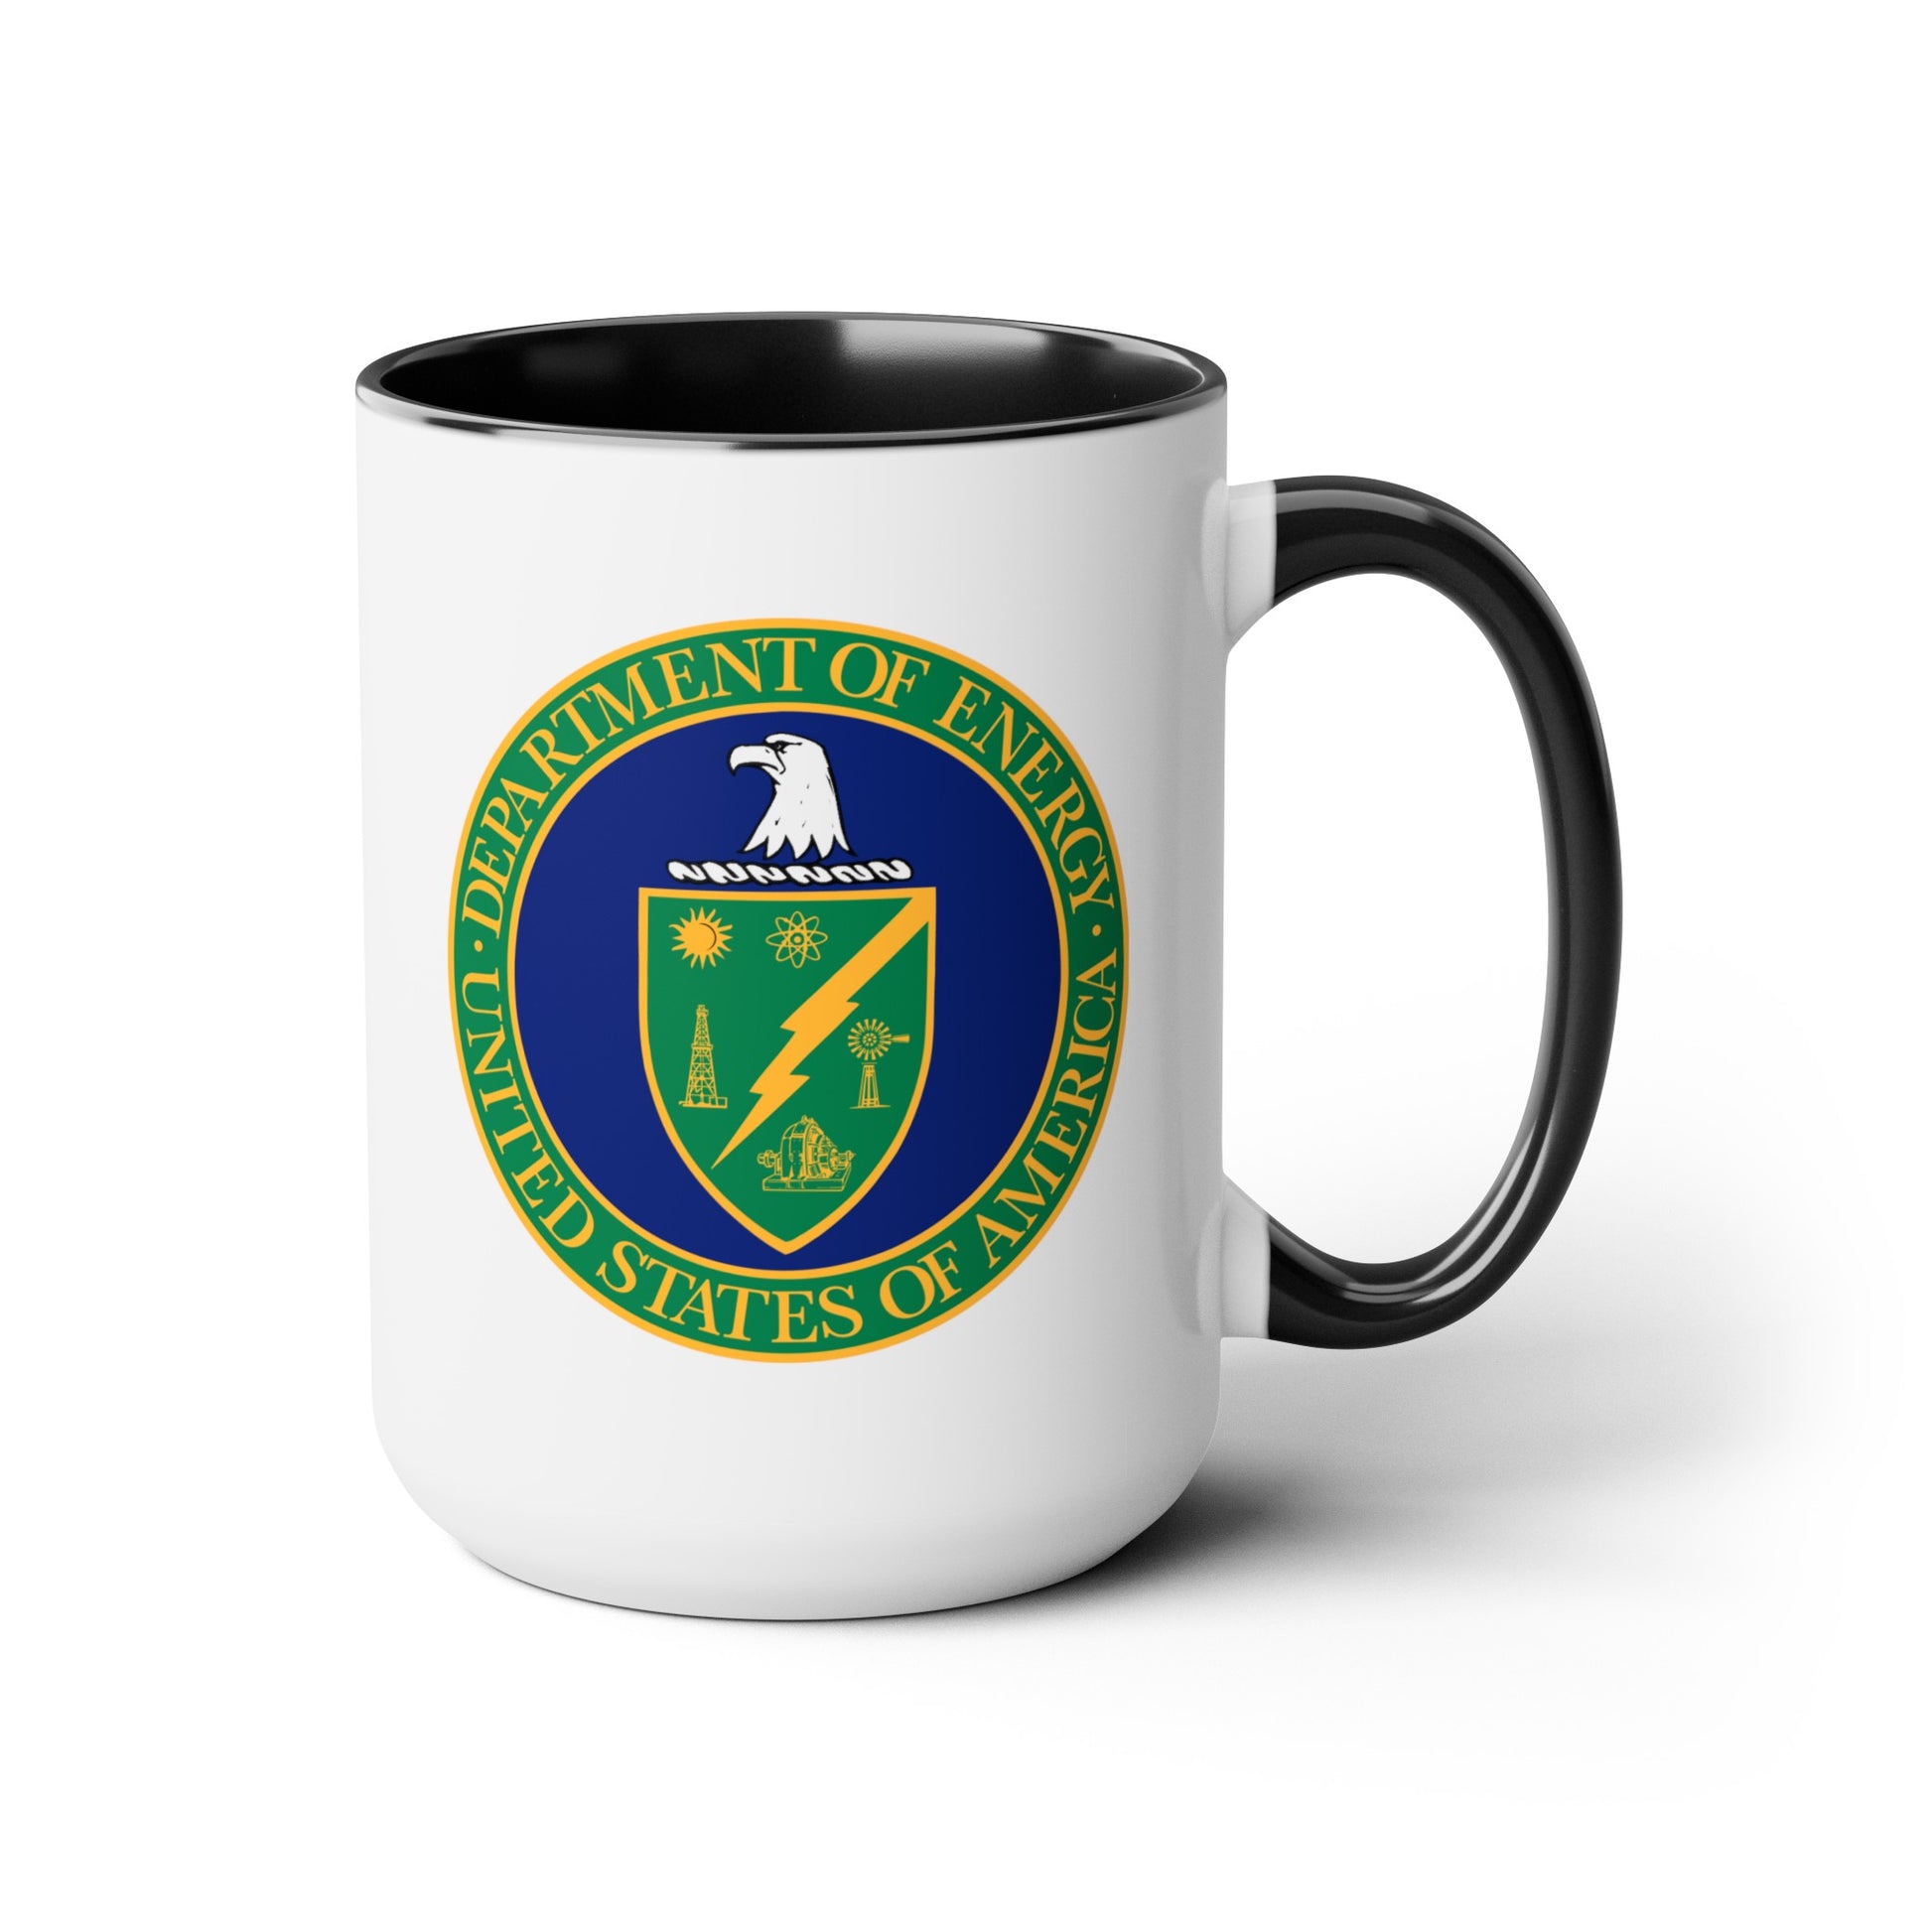 Department of Energy Coffee Mug - Double Sided Black Accent White Ceramic 15oz by TheGlassyLass.com